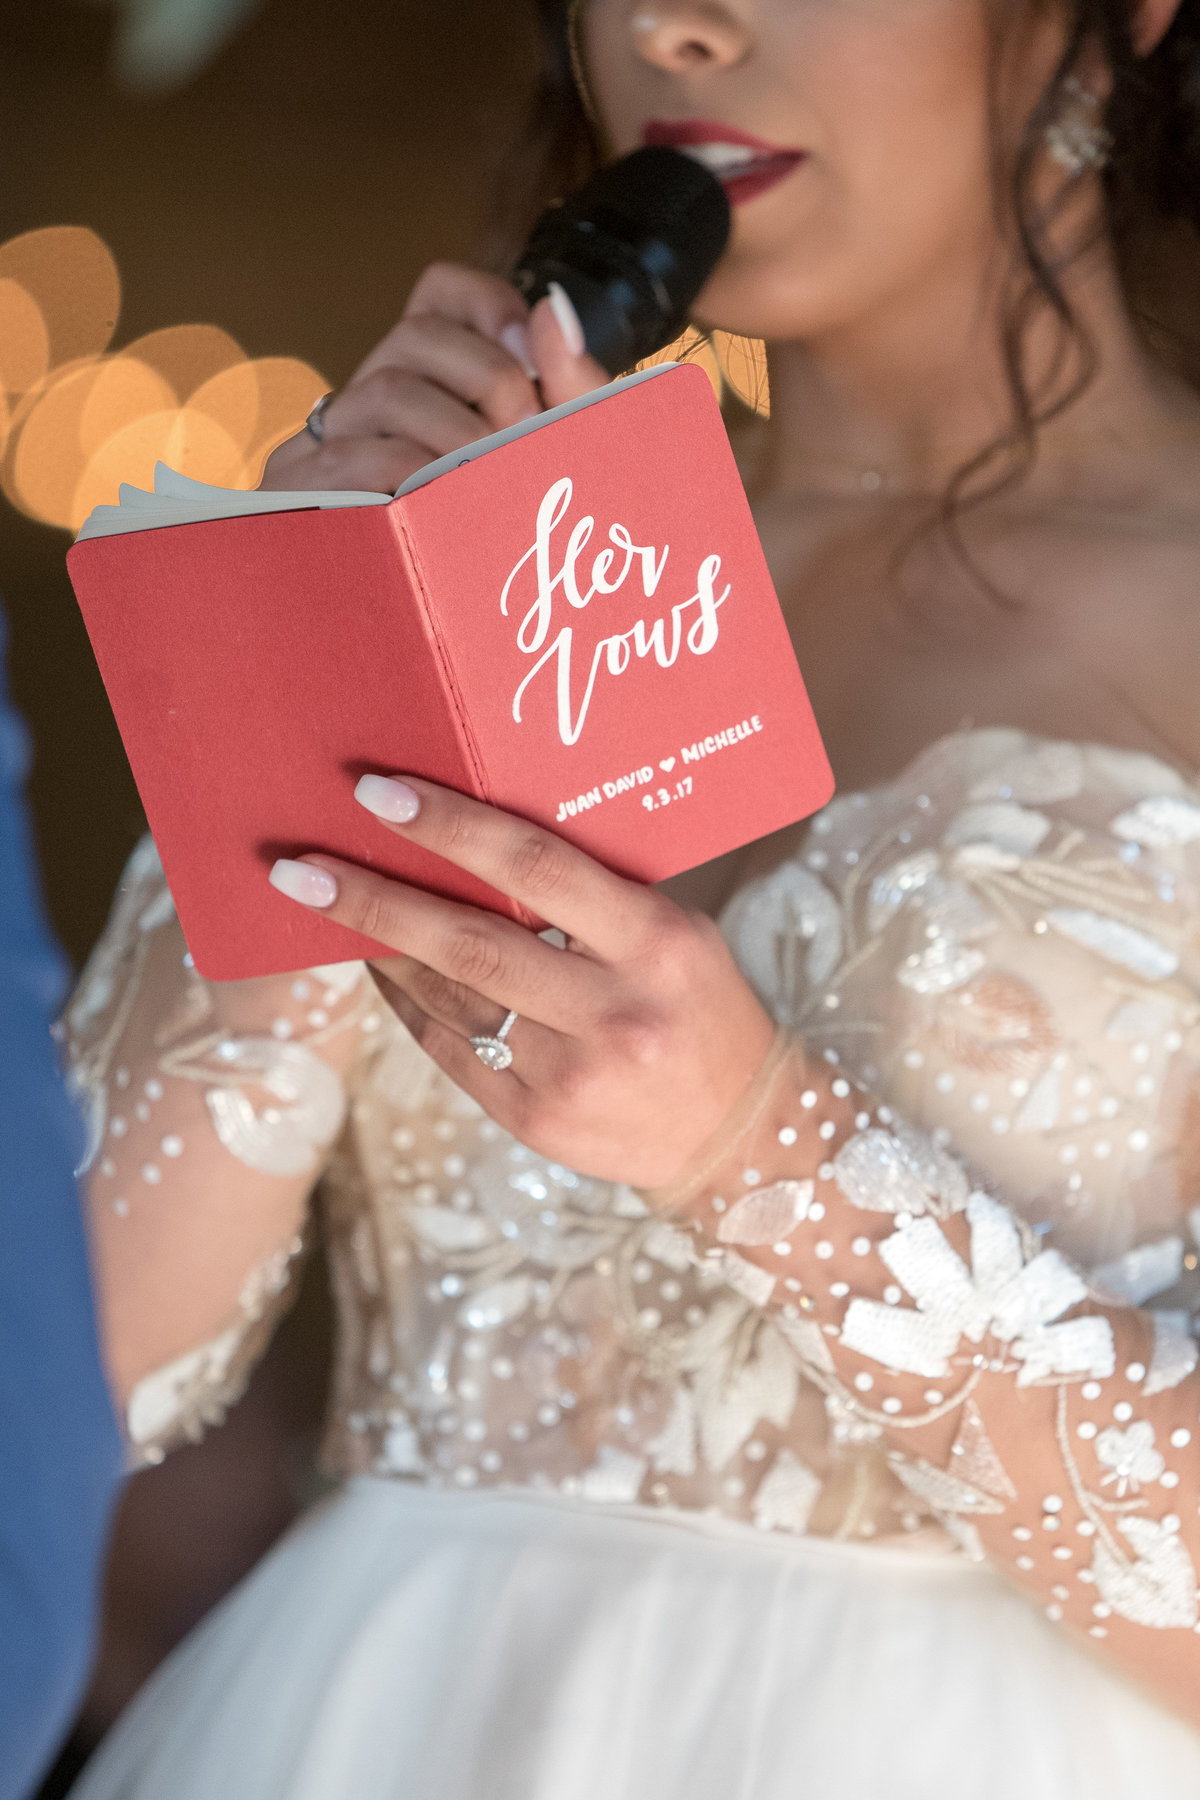 Her Vows book